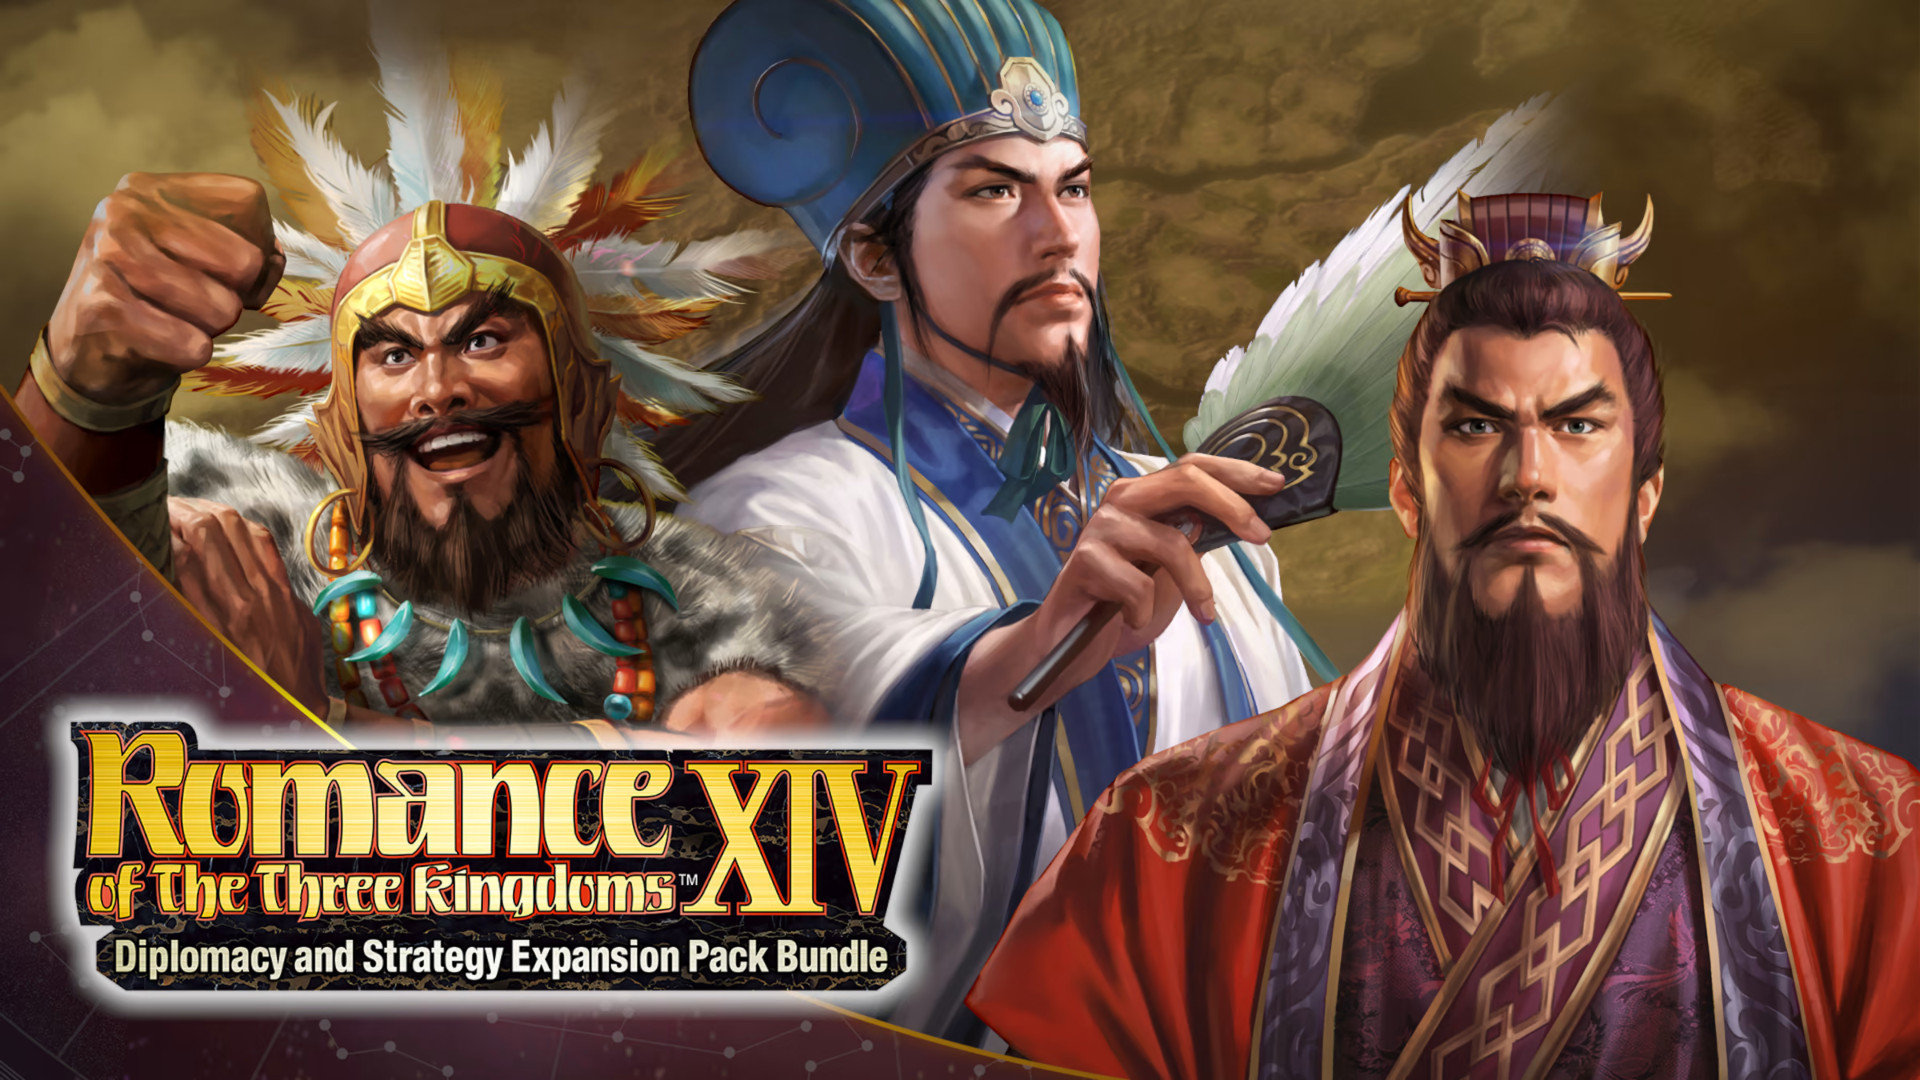 Romance of the Three Kingdoms XIV - Diplomacy and Strategy Expansion Pack DLC Steam CD key, 39.55$